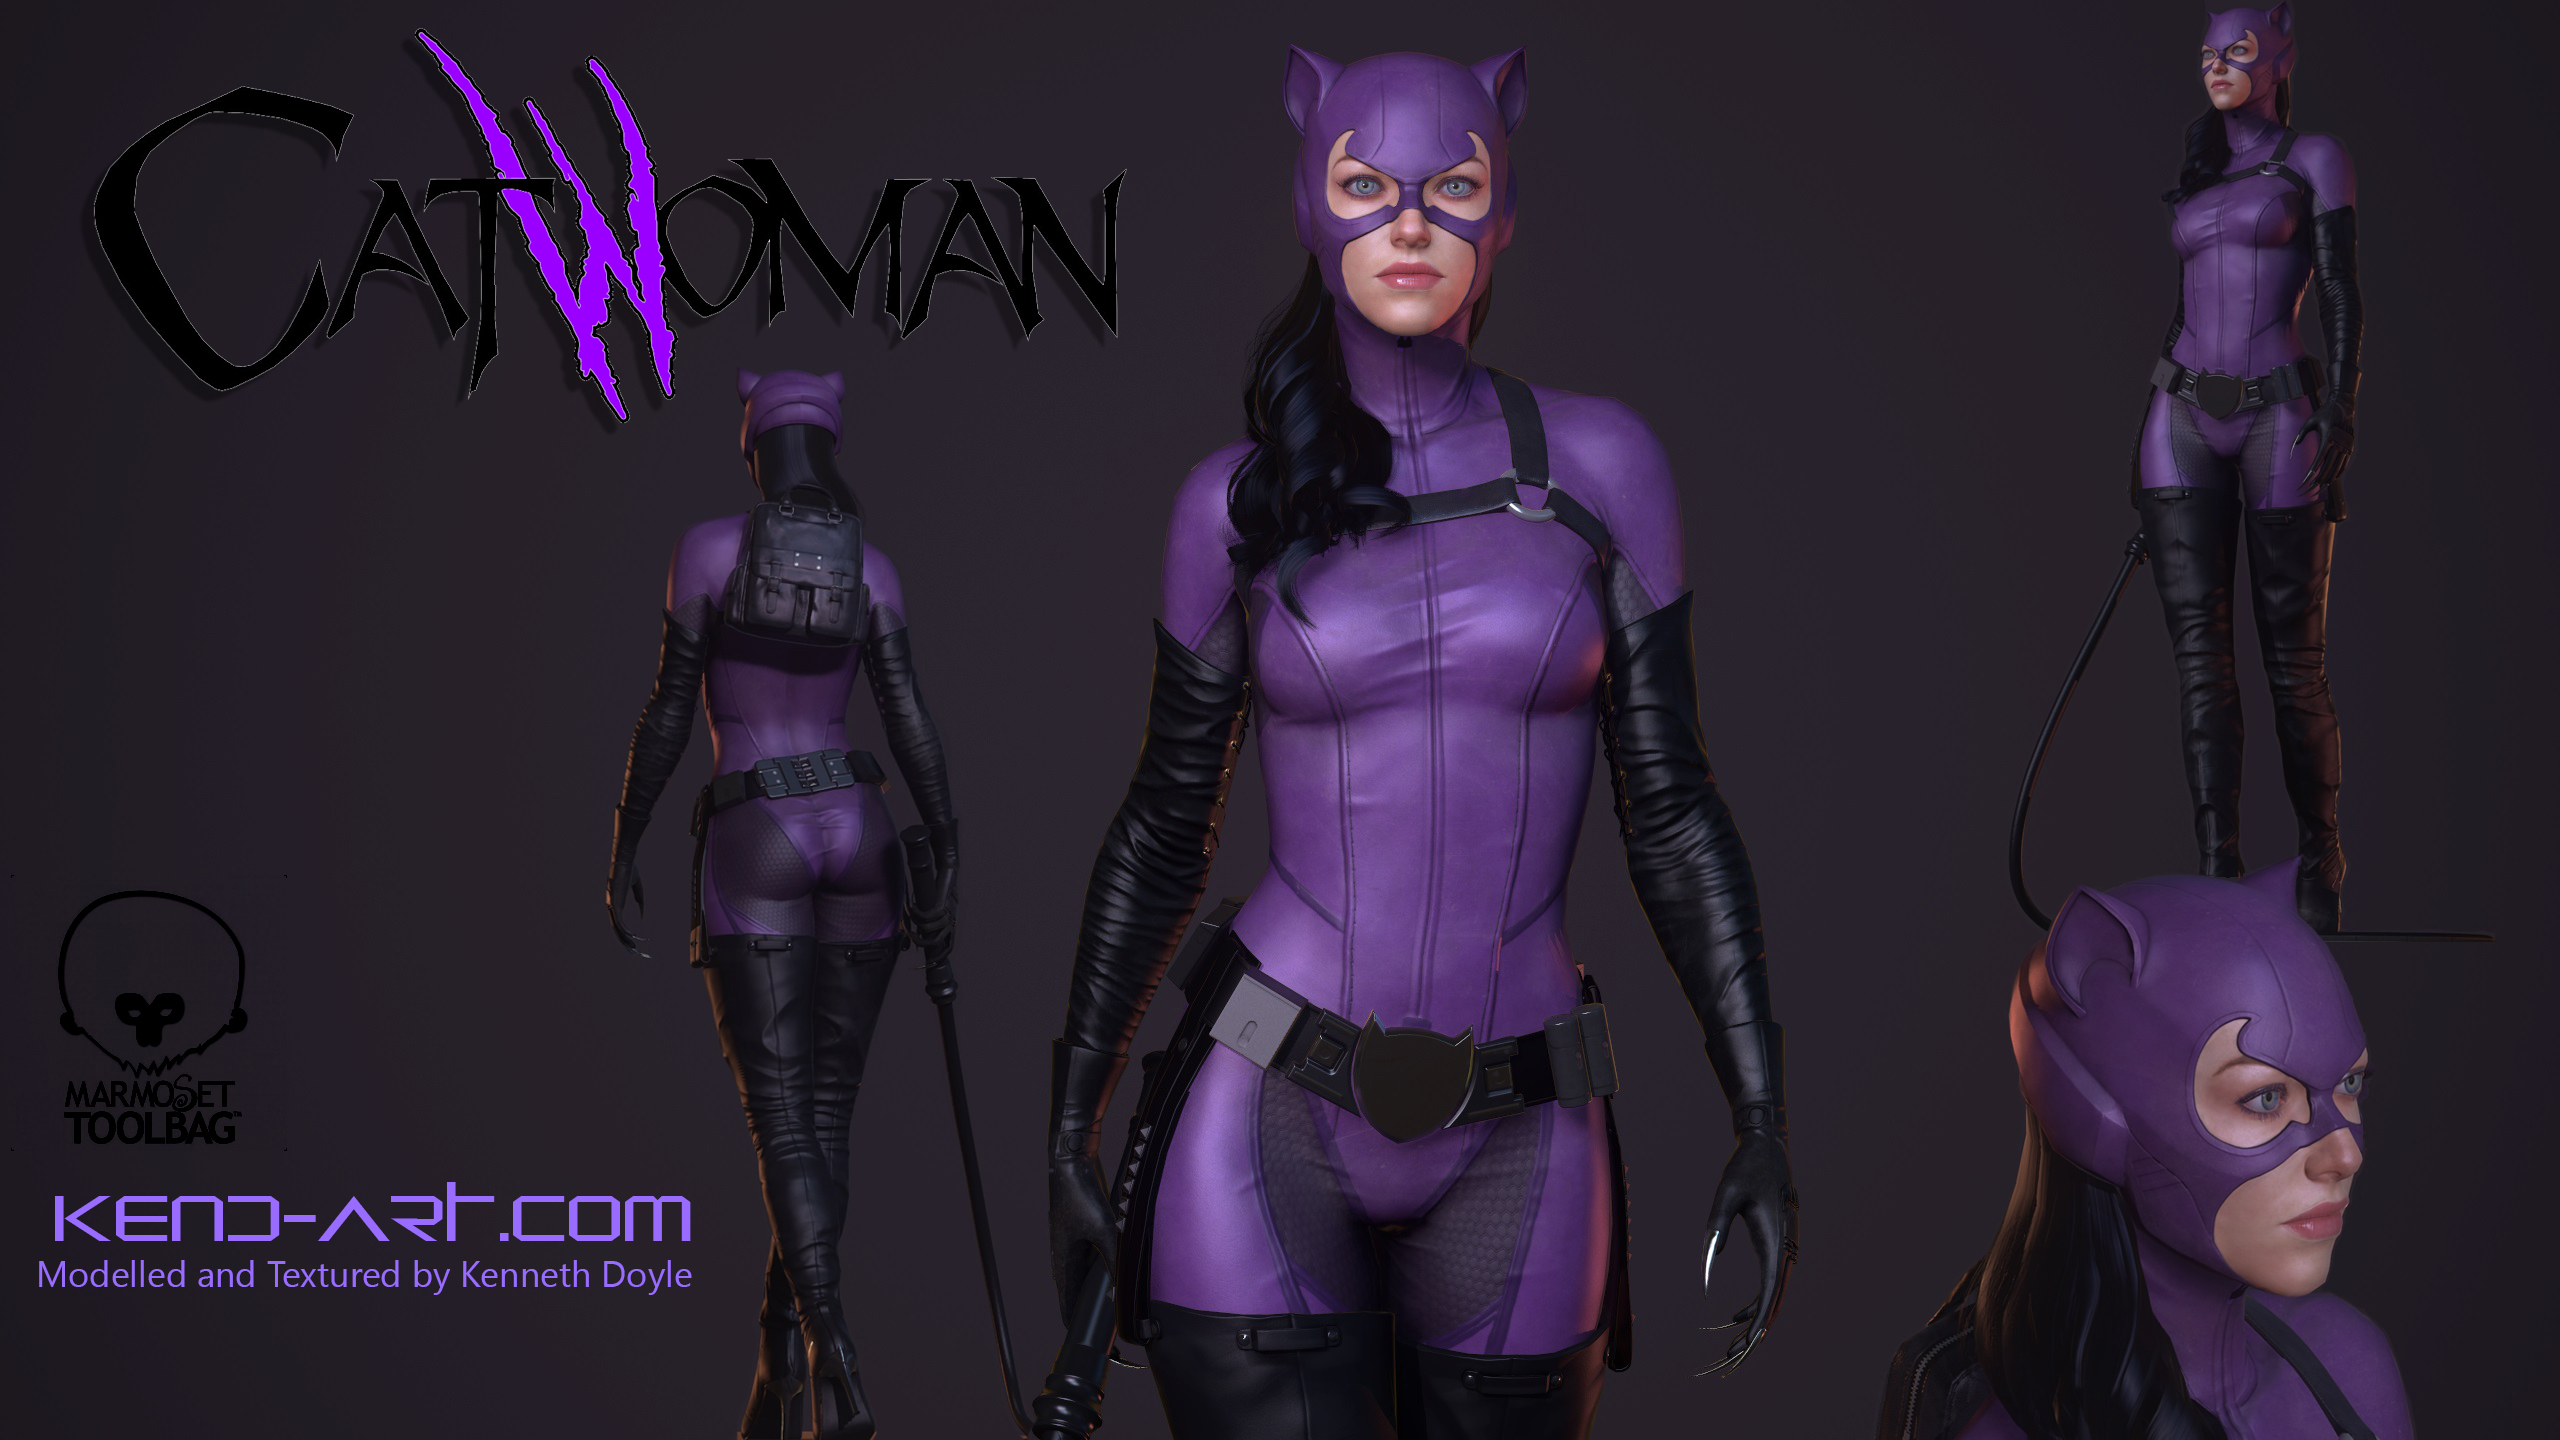 catwoman_by_kdoyle9-d7vp4uo.jpg